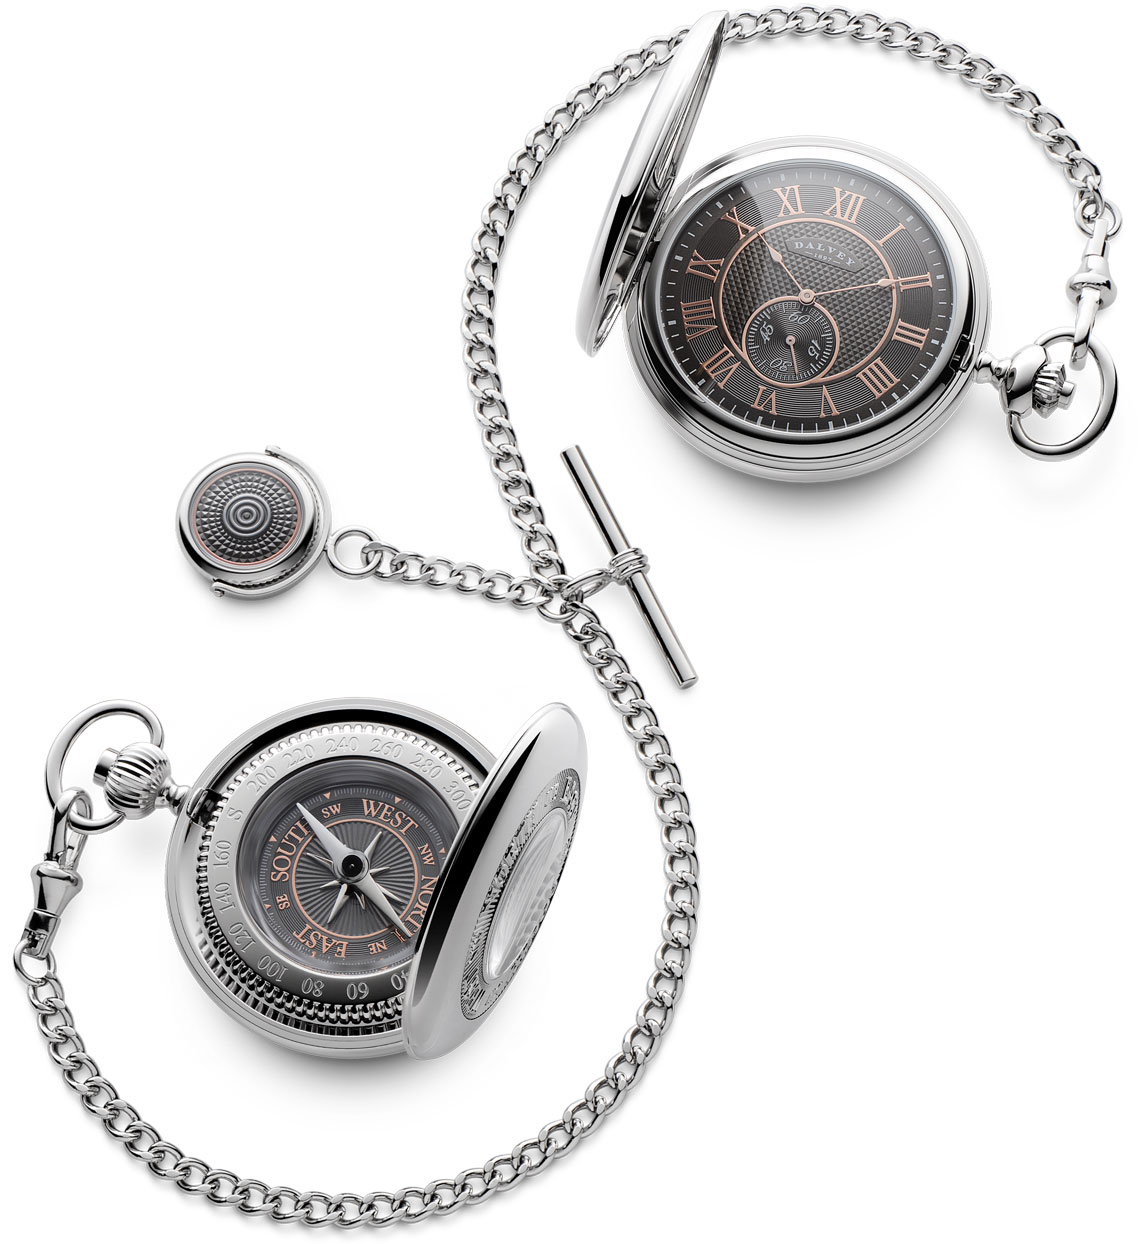 vreugde Uit Afwijzen Pocket Watch Pocket Compass and Double Albert Gift Set Grey and Rose Gold -  Dalvey